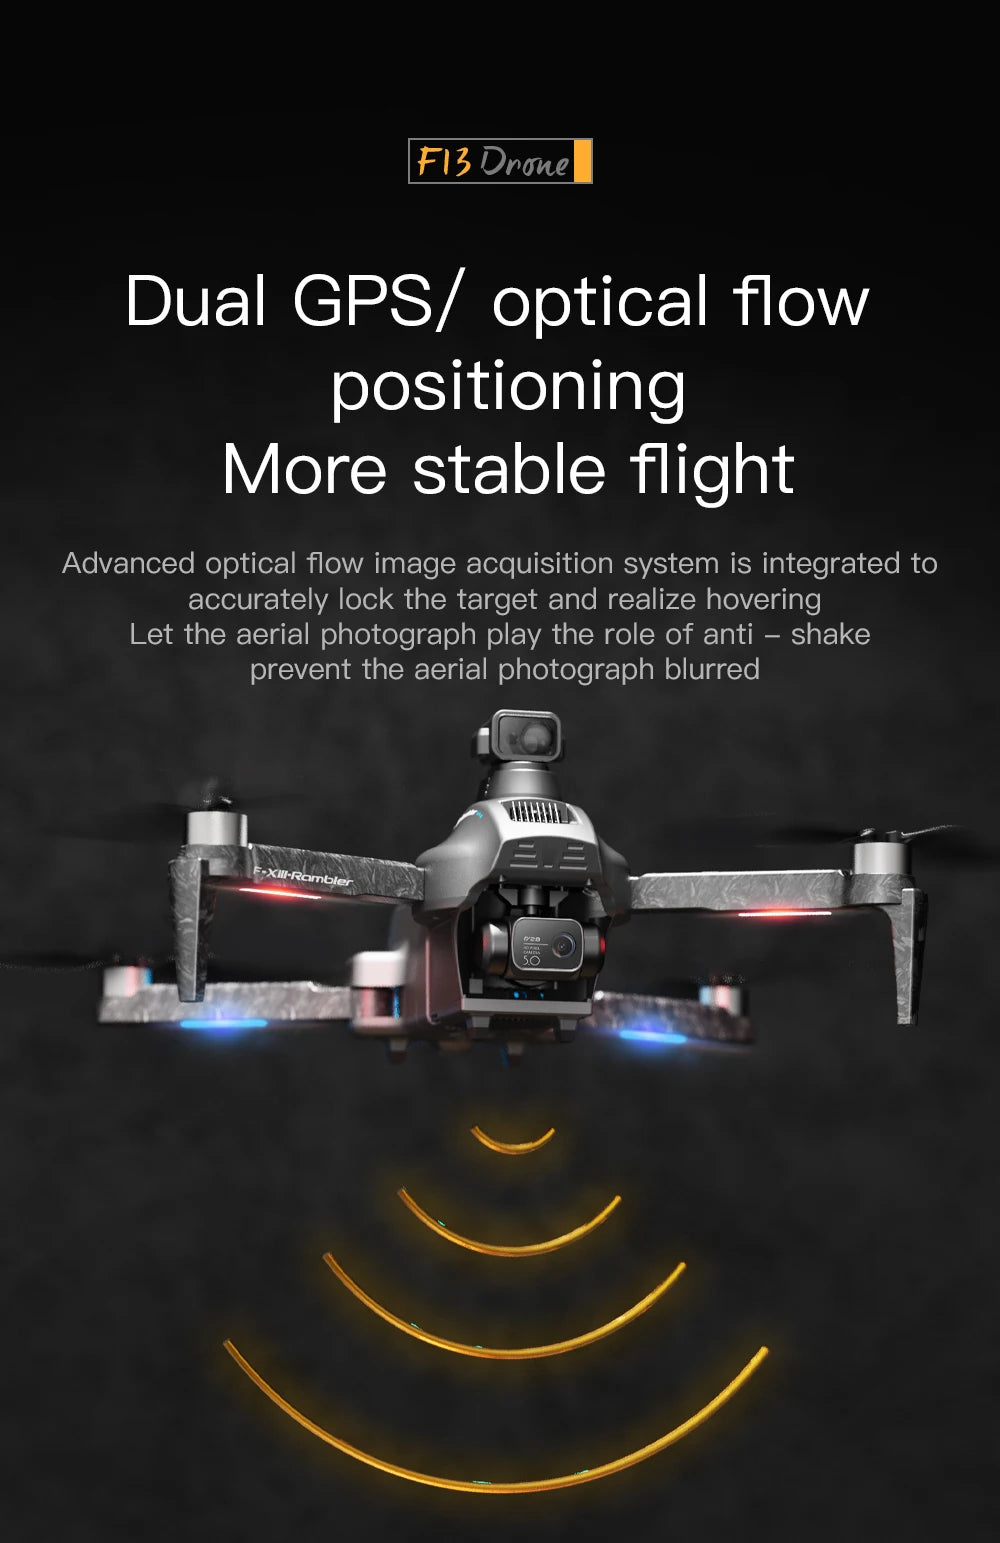 F13 Drone, [F1g Orone] Dual GPSI optical flow positioning More stable flight Xt